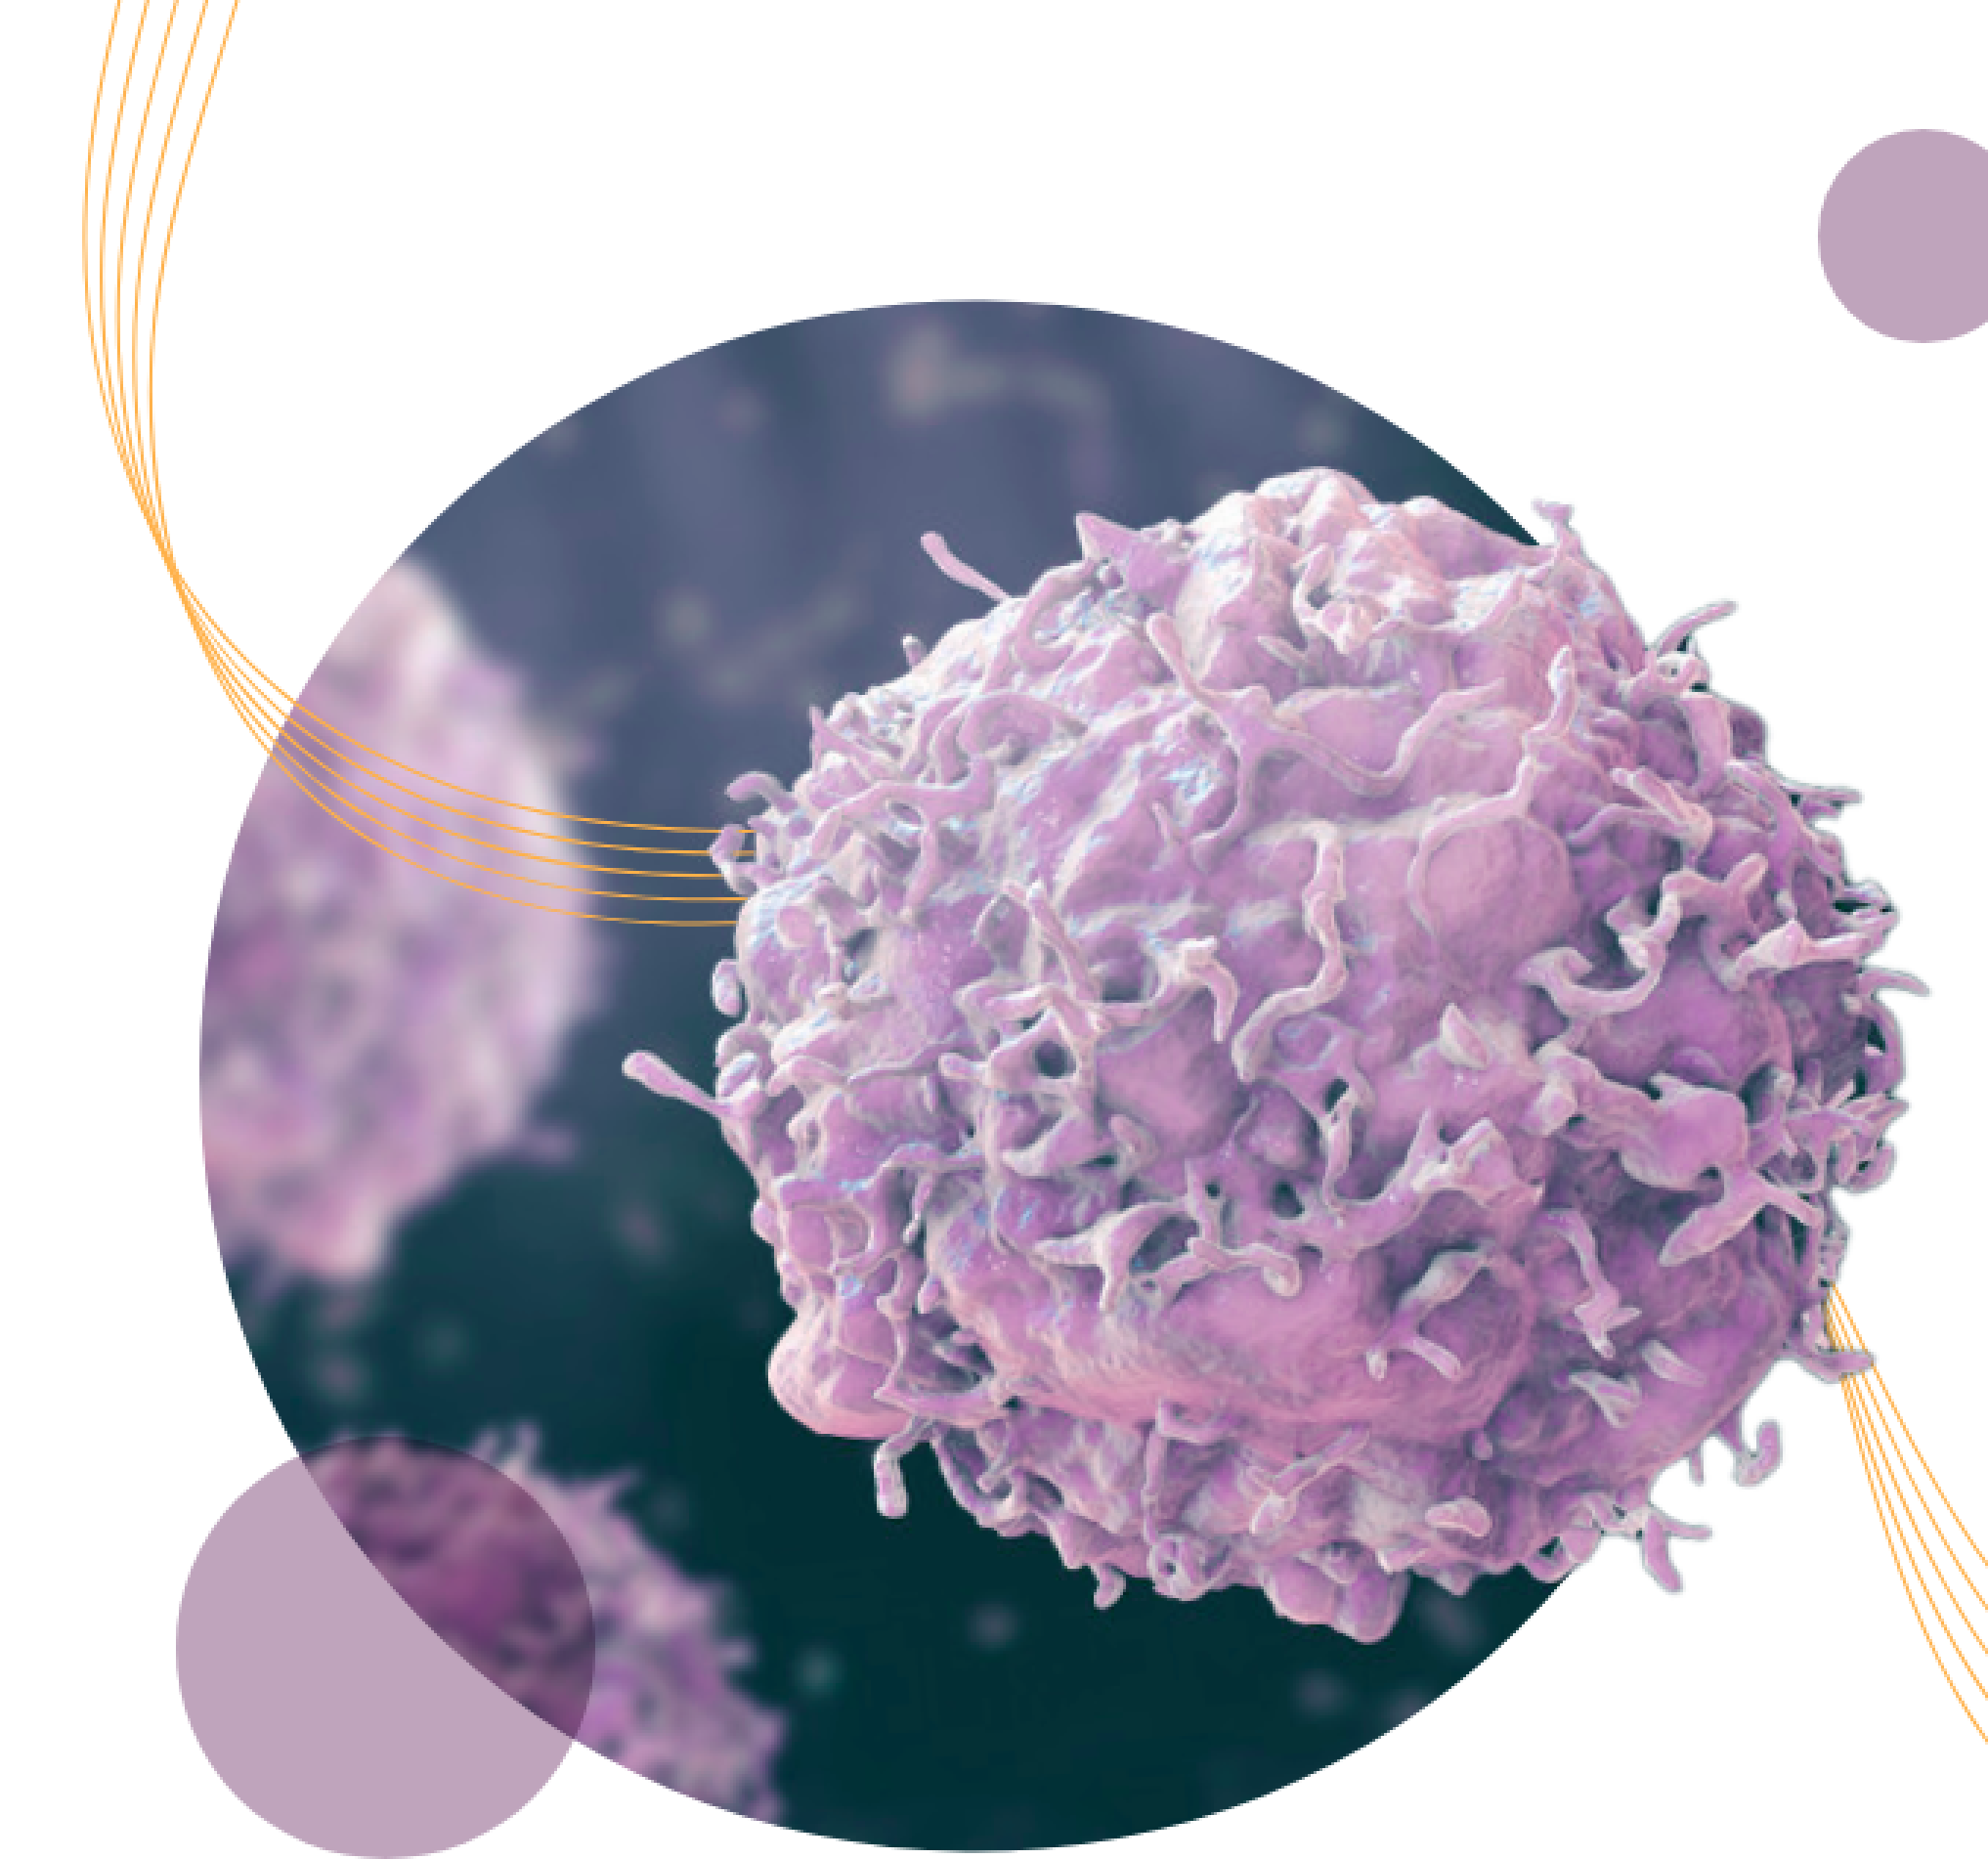 5 parallel orange lines winding through circle containing up-close view of a cancer cell. Two small purple circles surround the main photo.